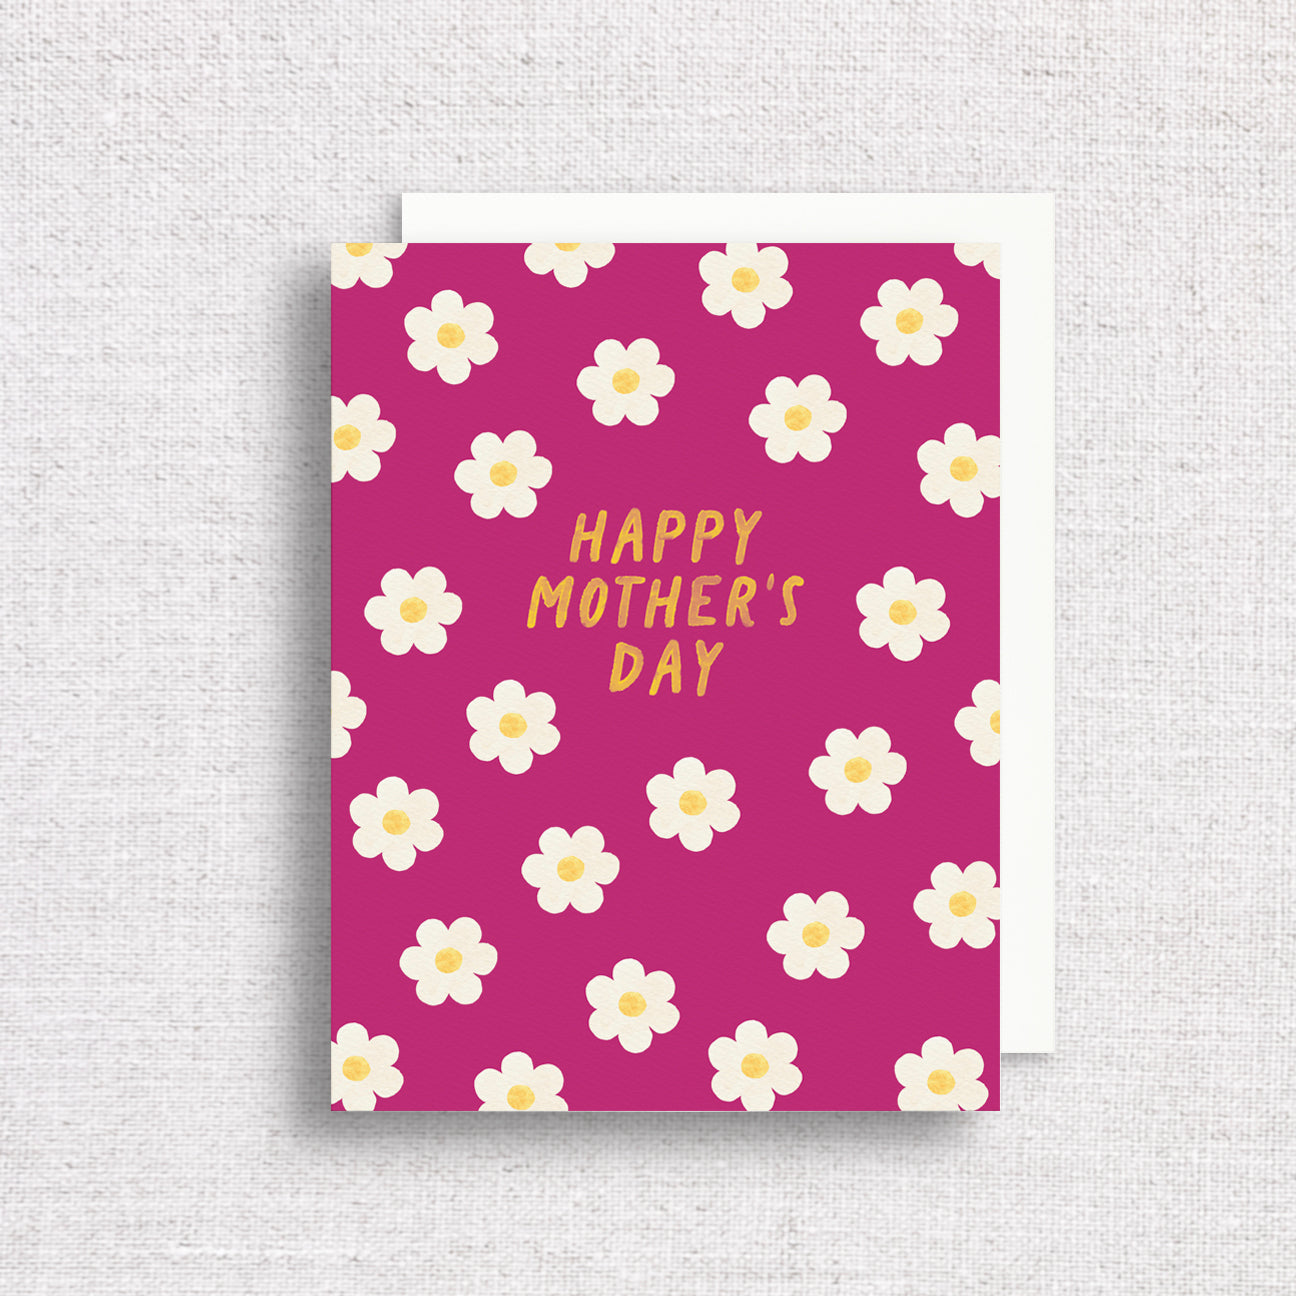 Mother's Day Daisy Greeting Card by Gert & Co